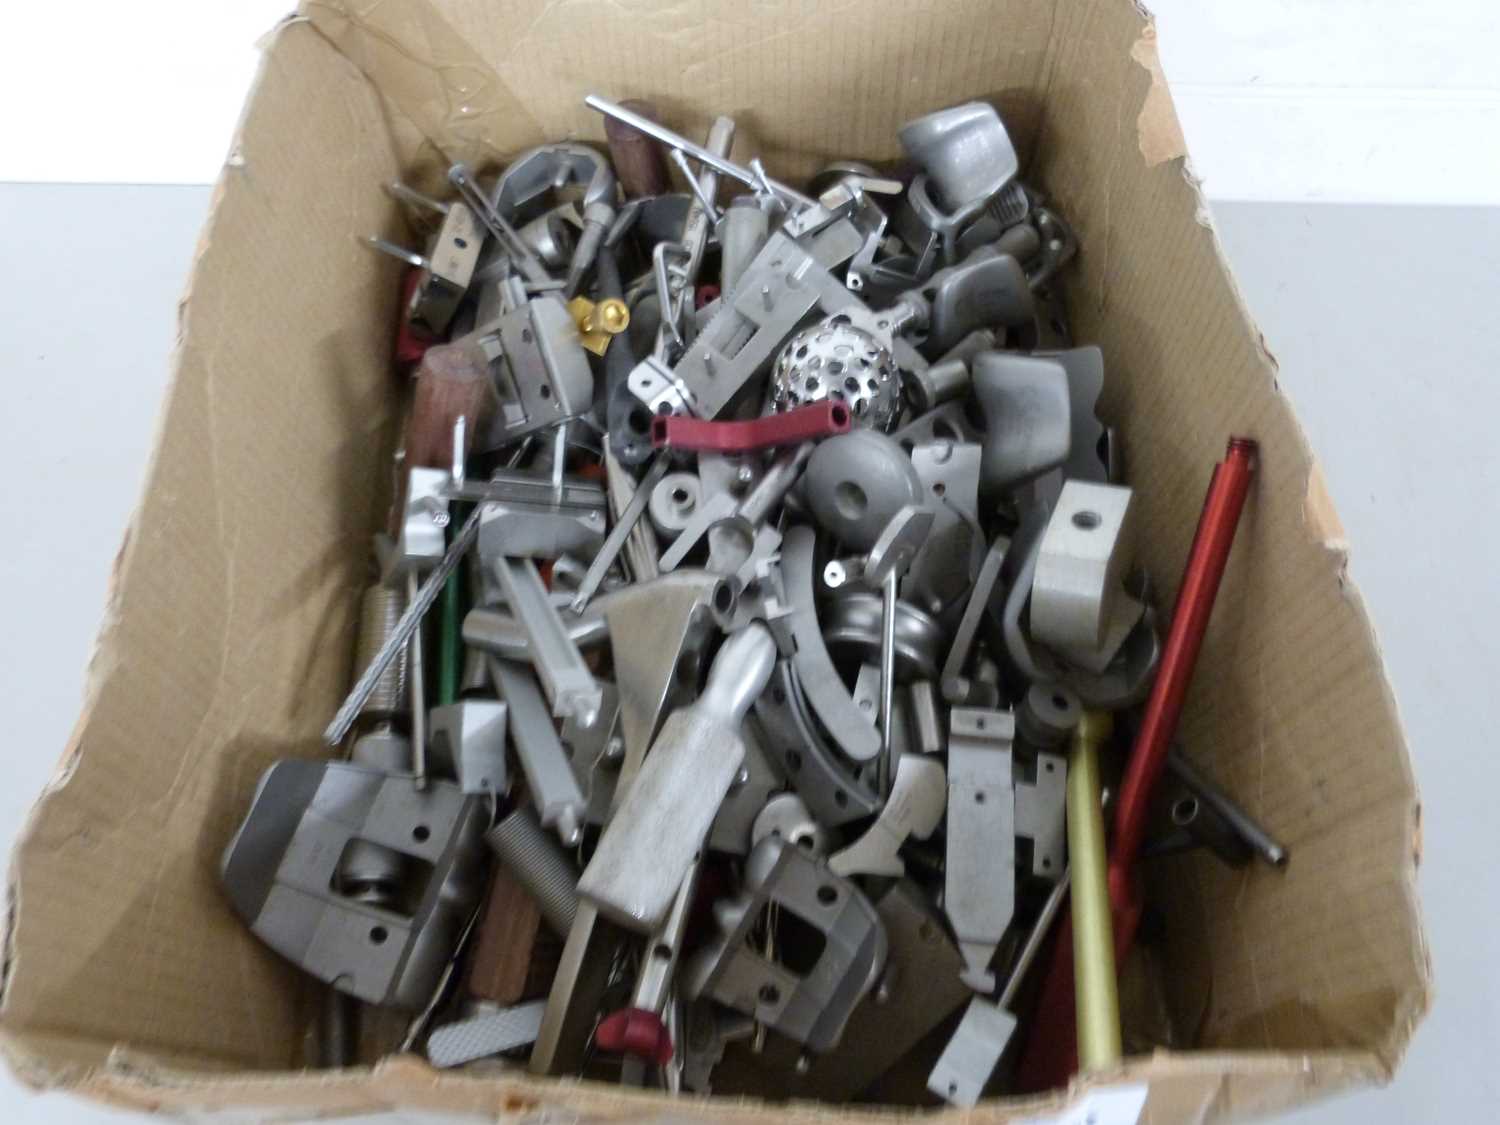 One box containing various vintage tools and spares